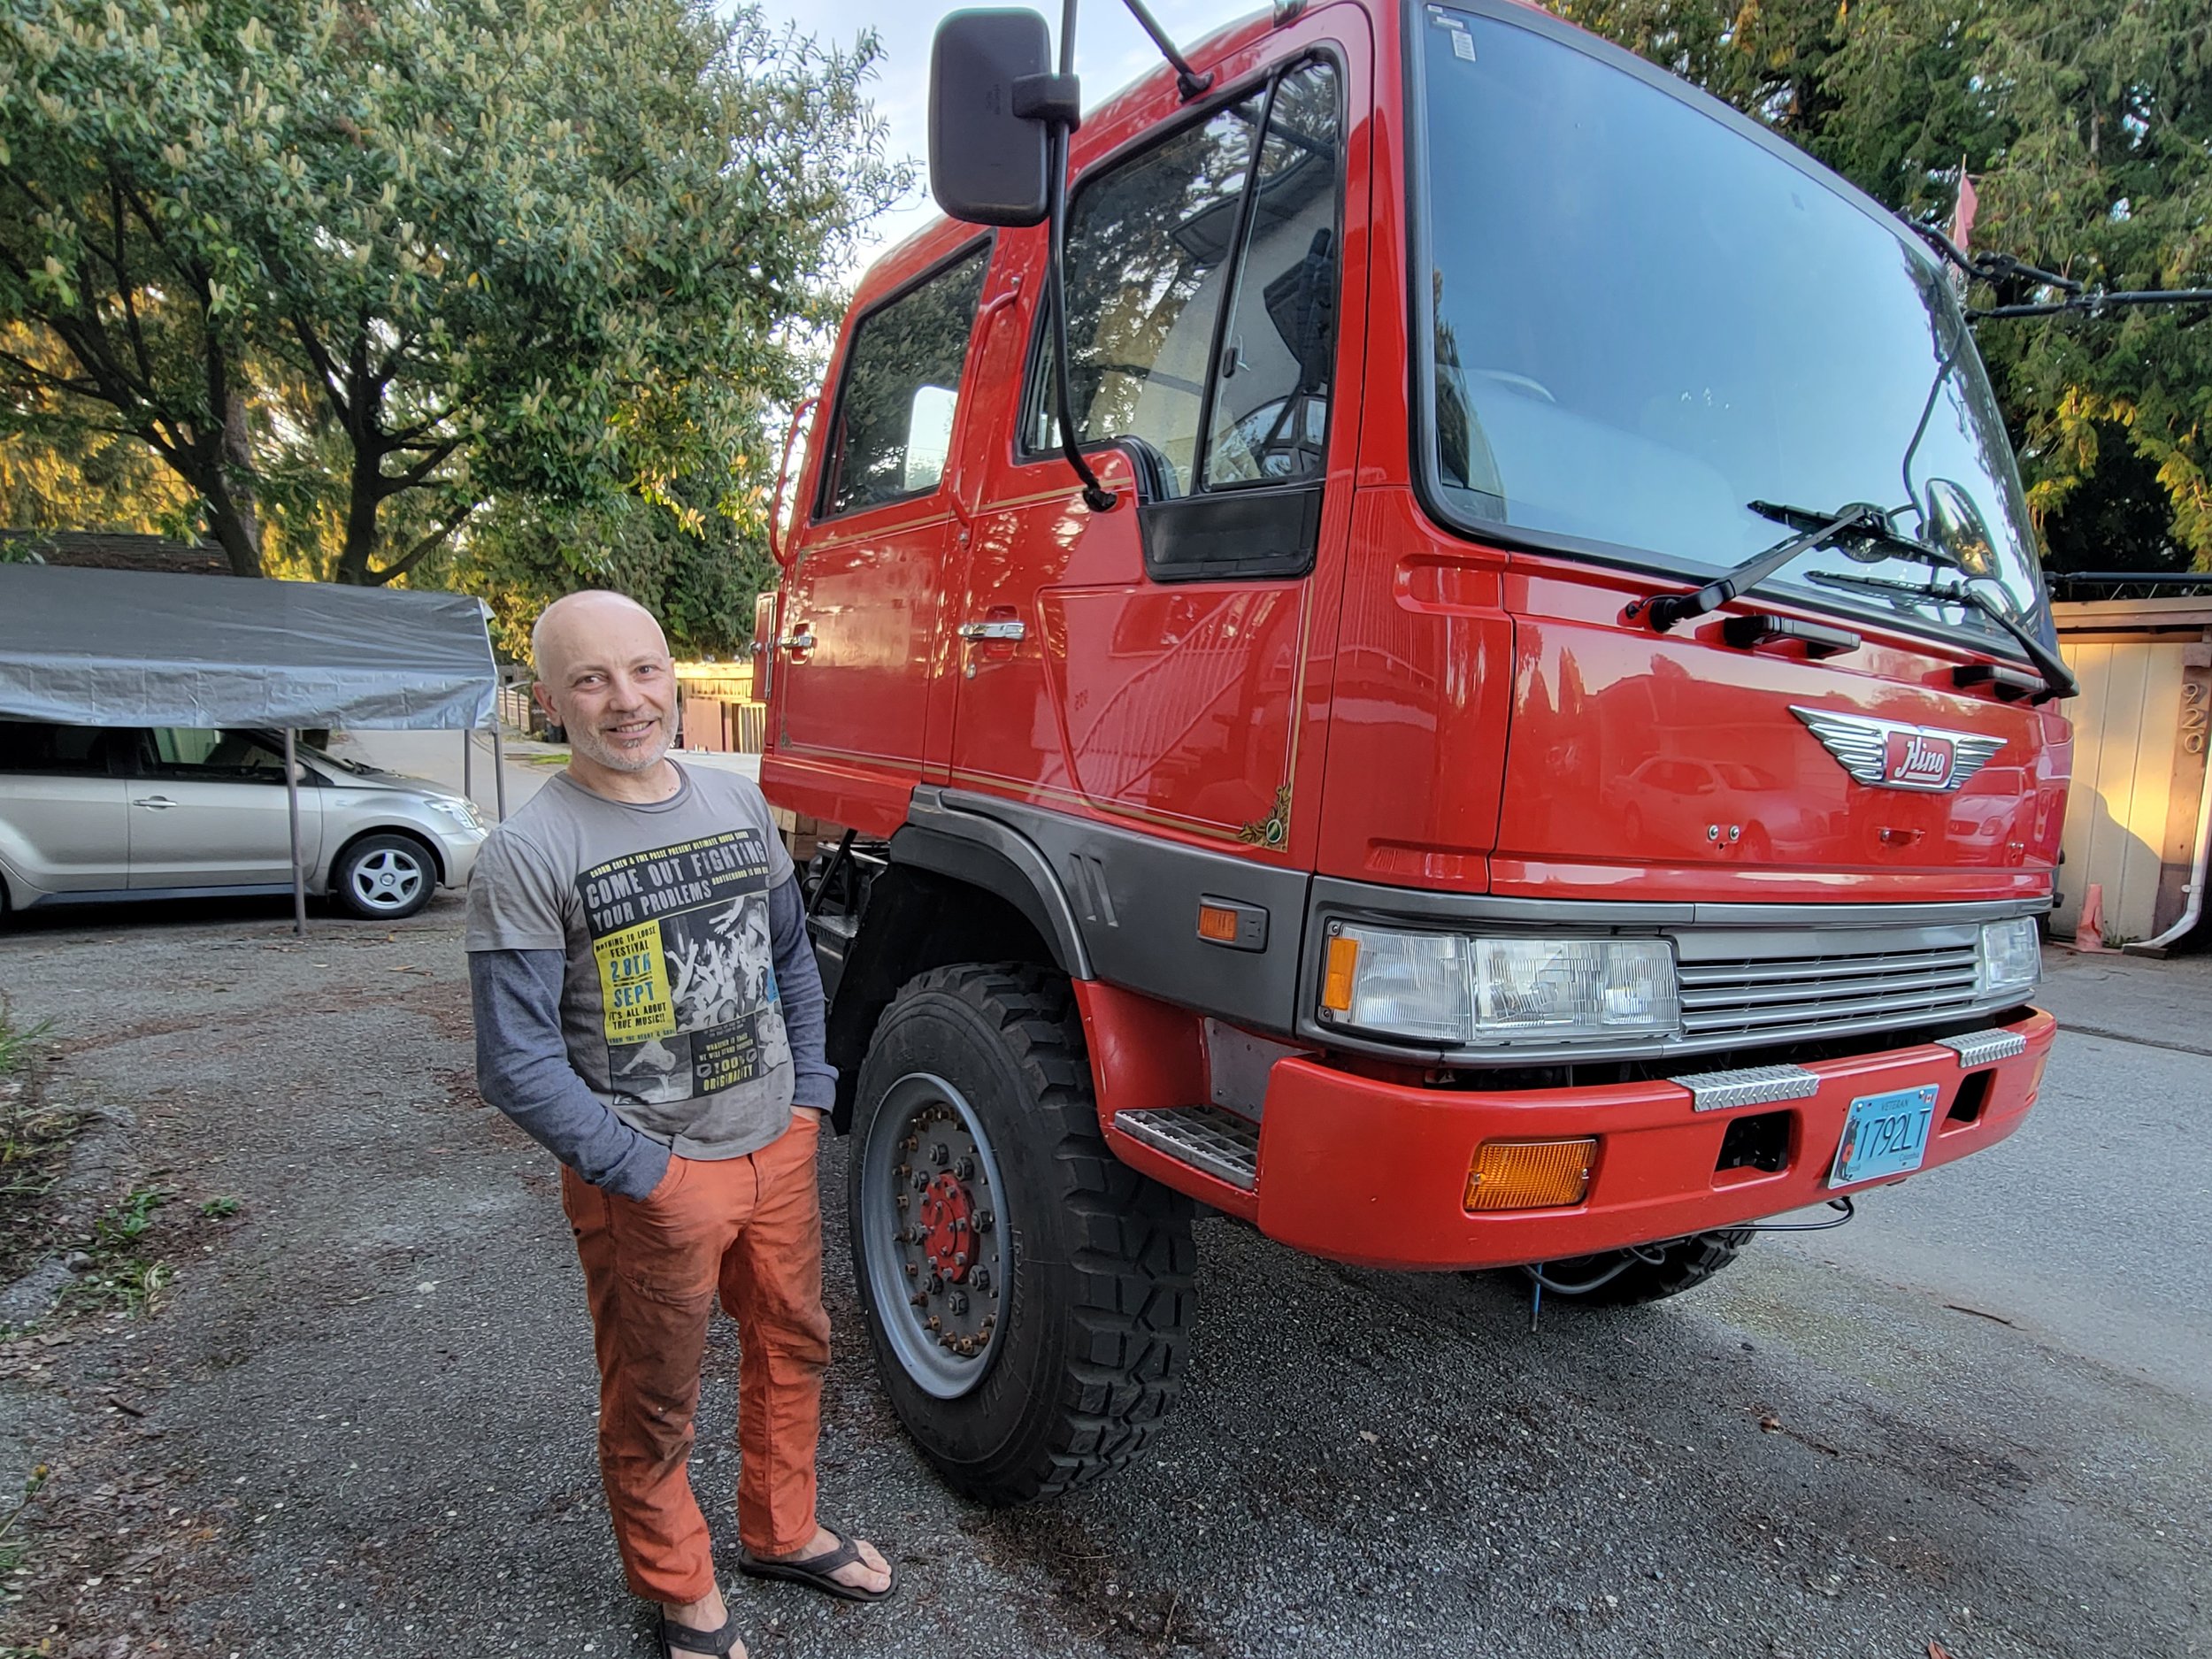 Dave next to a Japanese firetruck he's working on. What a cool project.